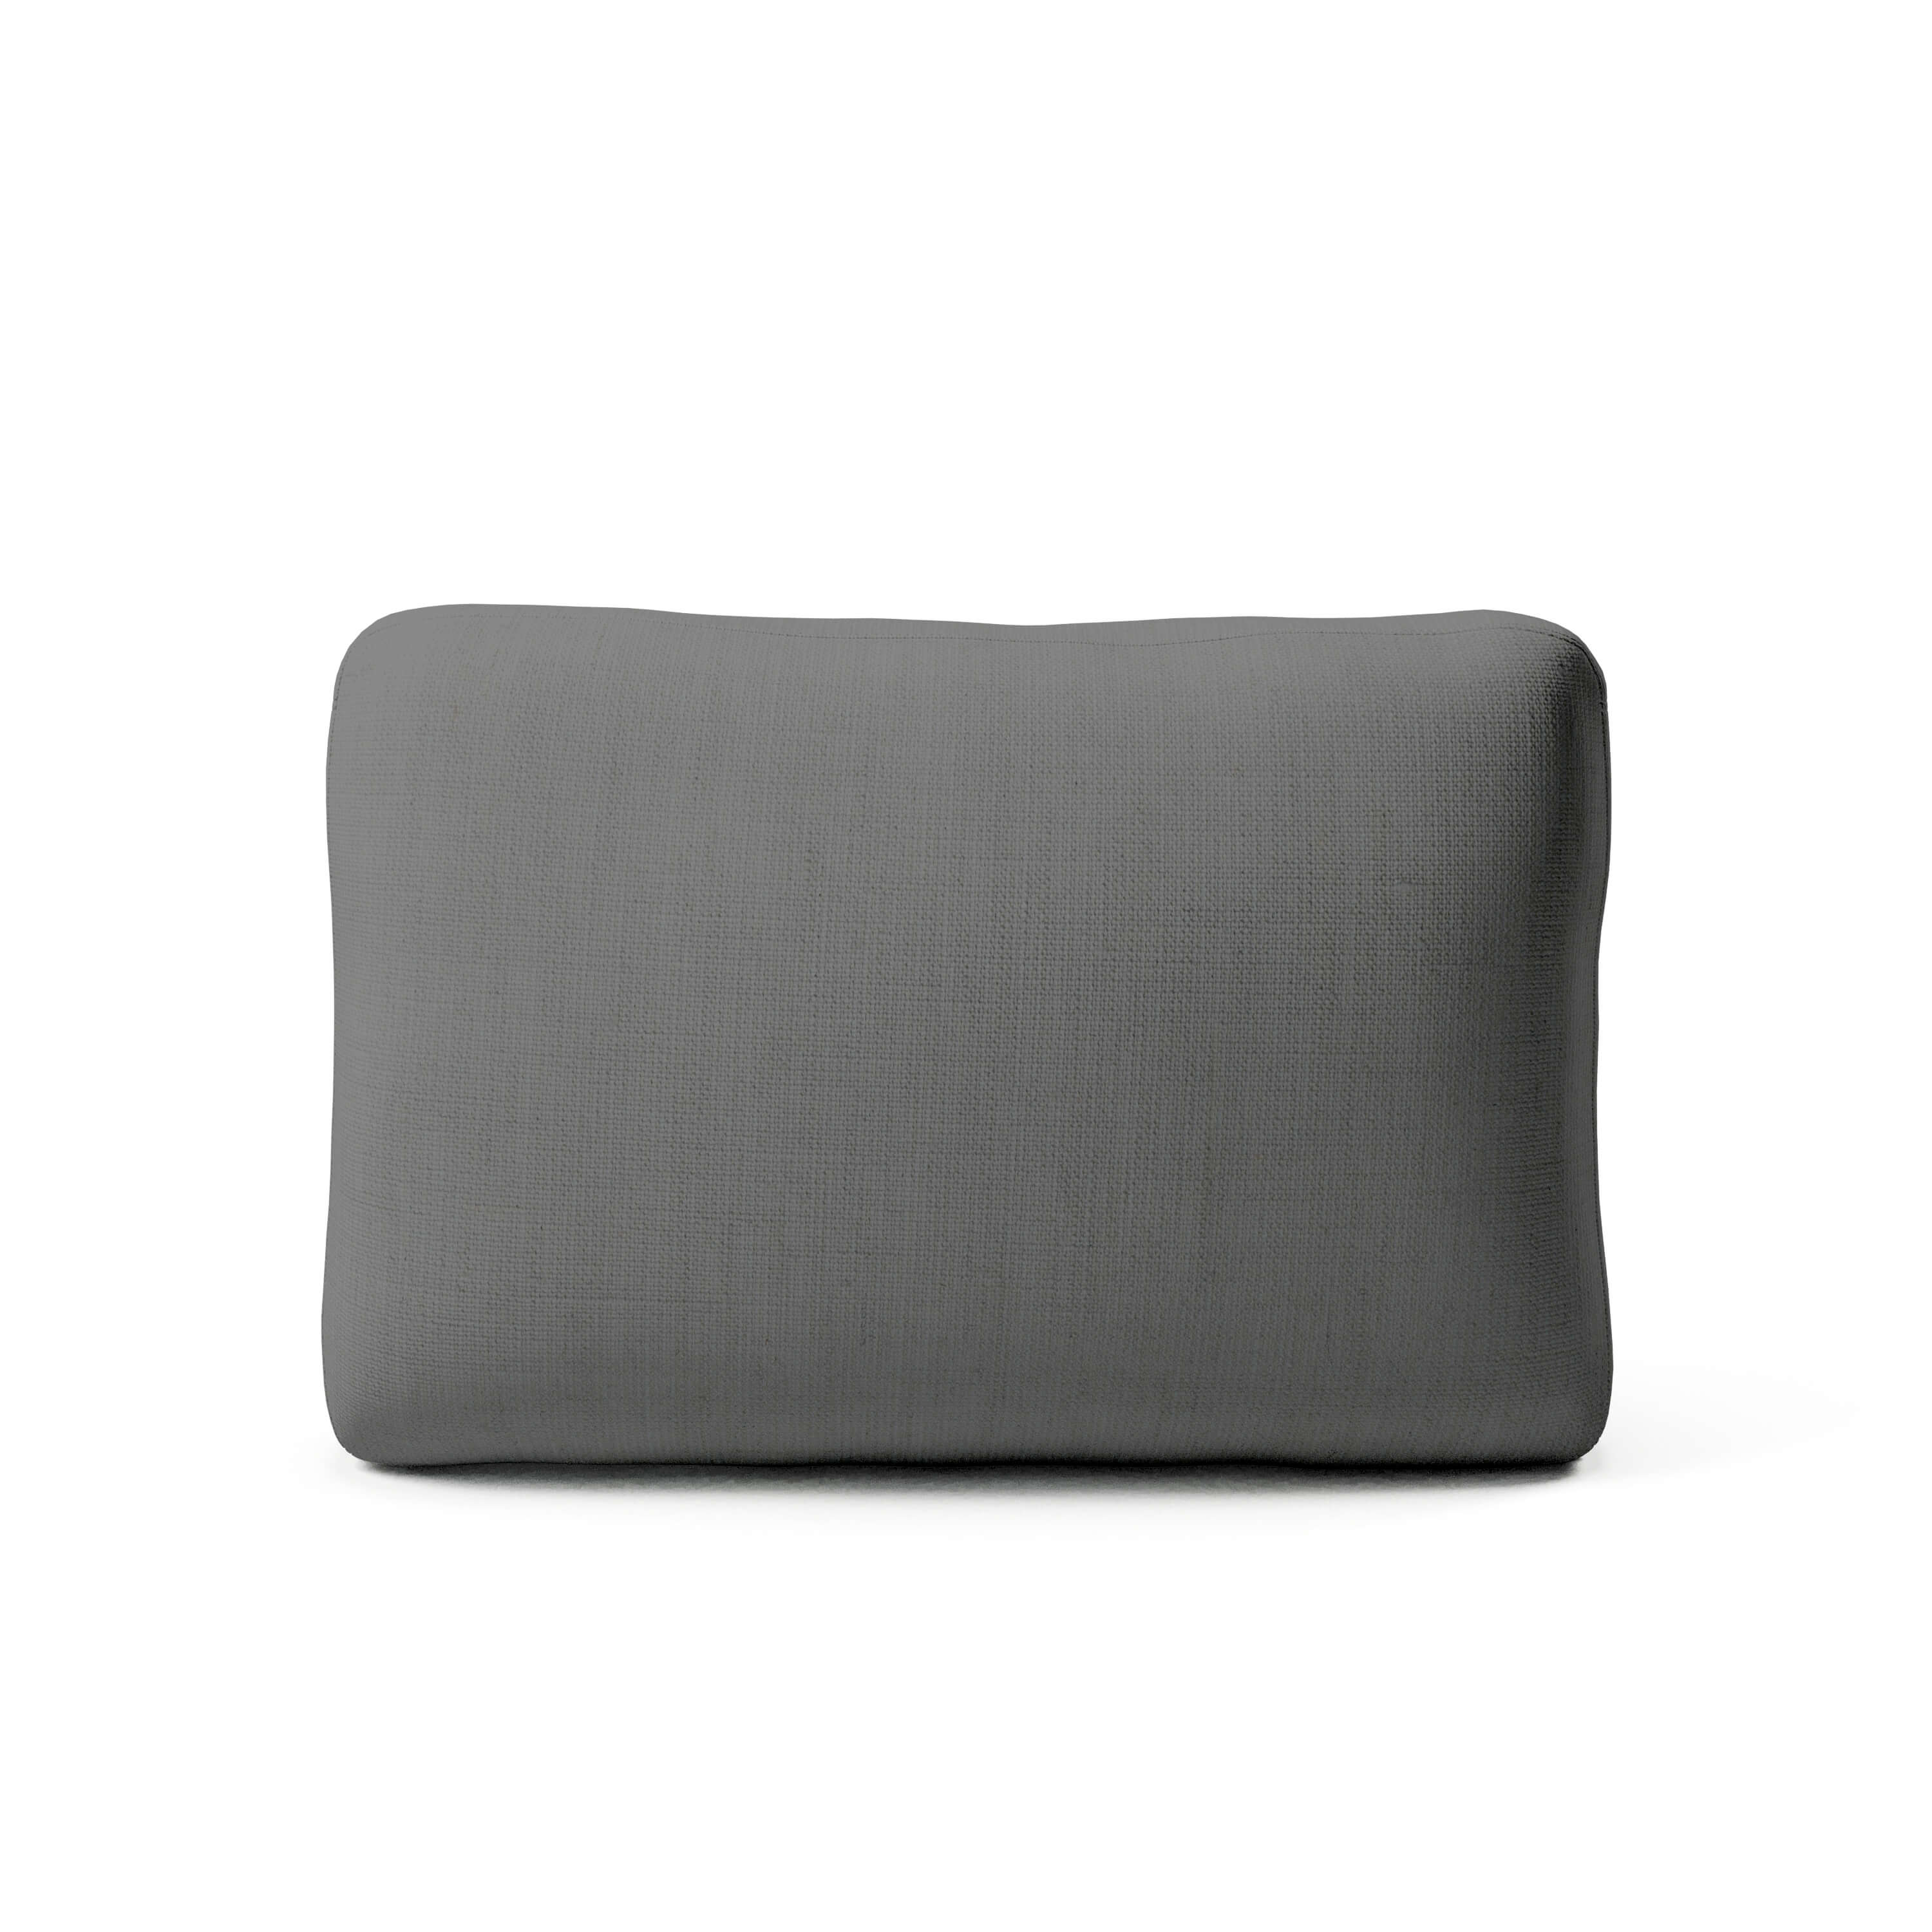 Comfy Sofa - Side Cushion Replacement